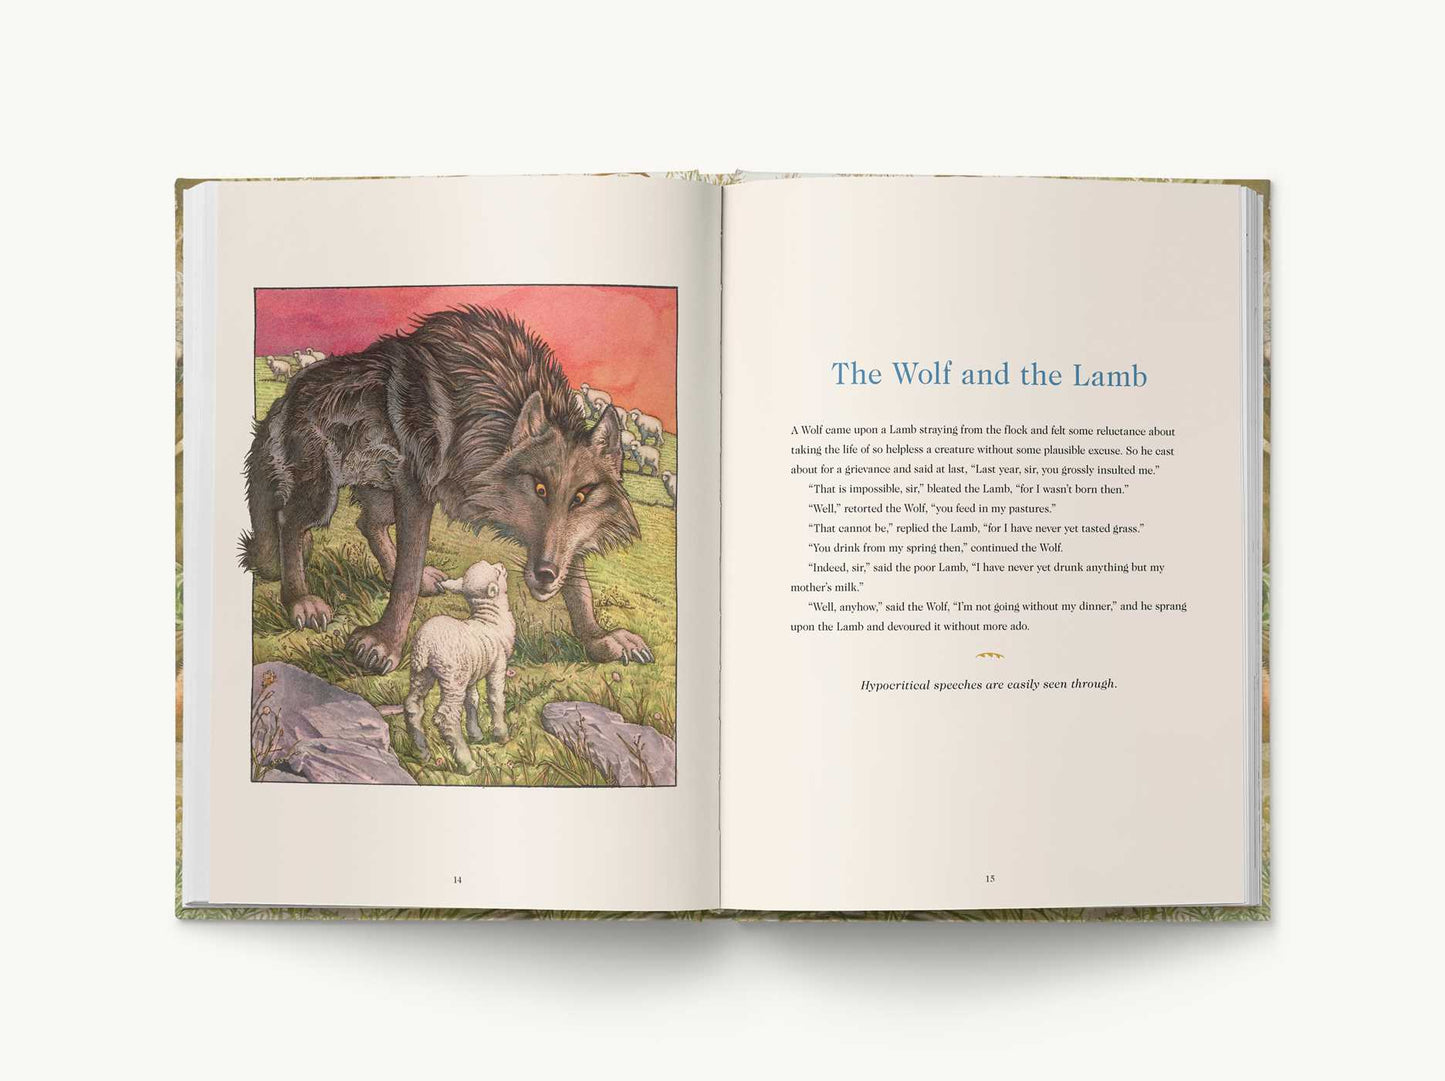 Aesop's Fables Hardcover: The Classic Edition by The New York Times Bestselling Illustrator, Charles Santore